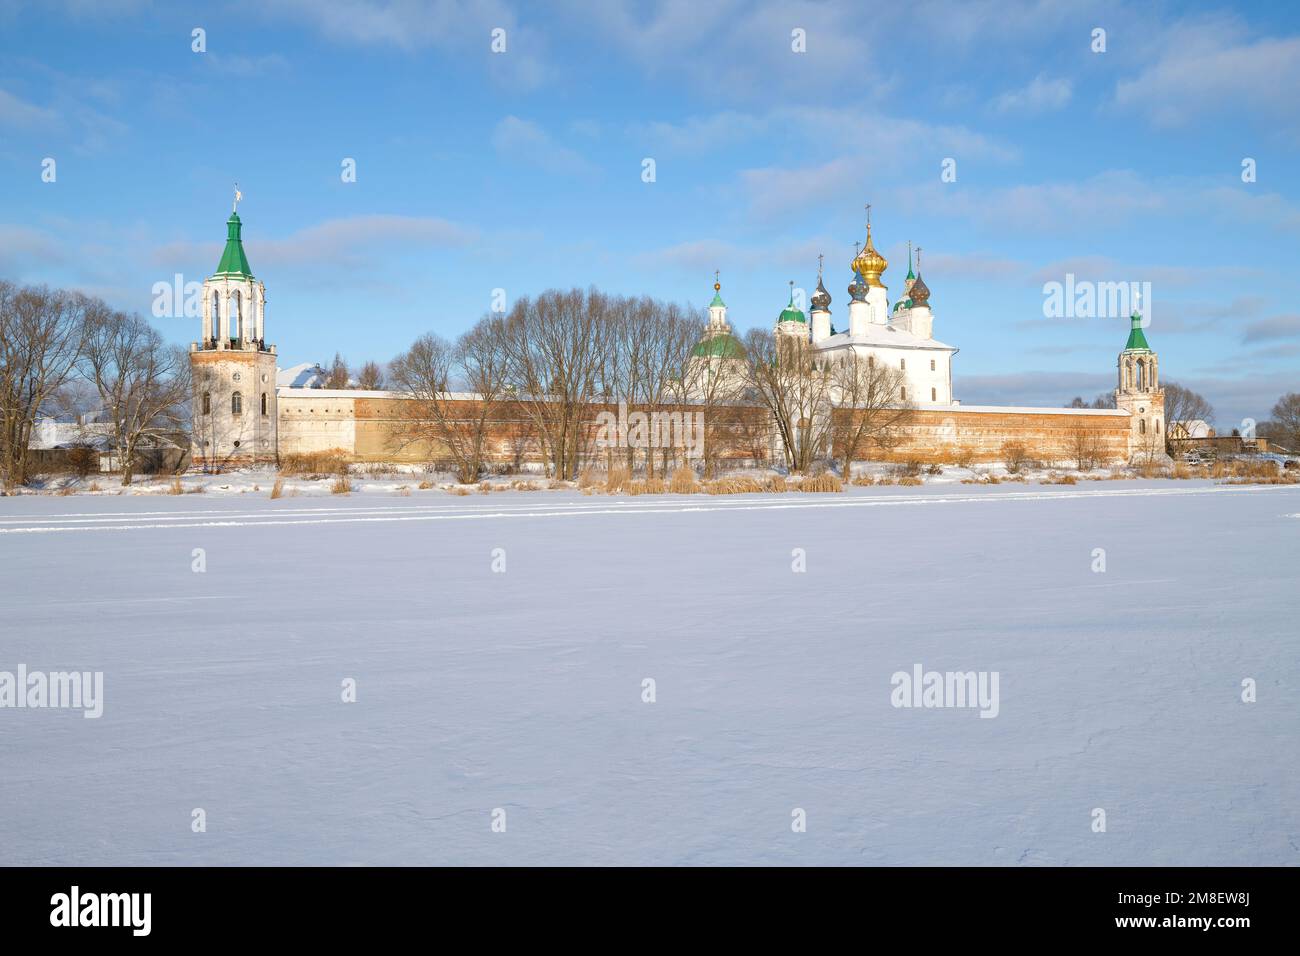 View of the ancient Spaso-Yakovlevsky Dmitriev Monastery on a sunny January day. Rostov, Golden Ring of Russia Stock Photo